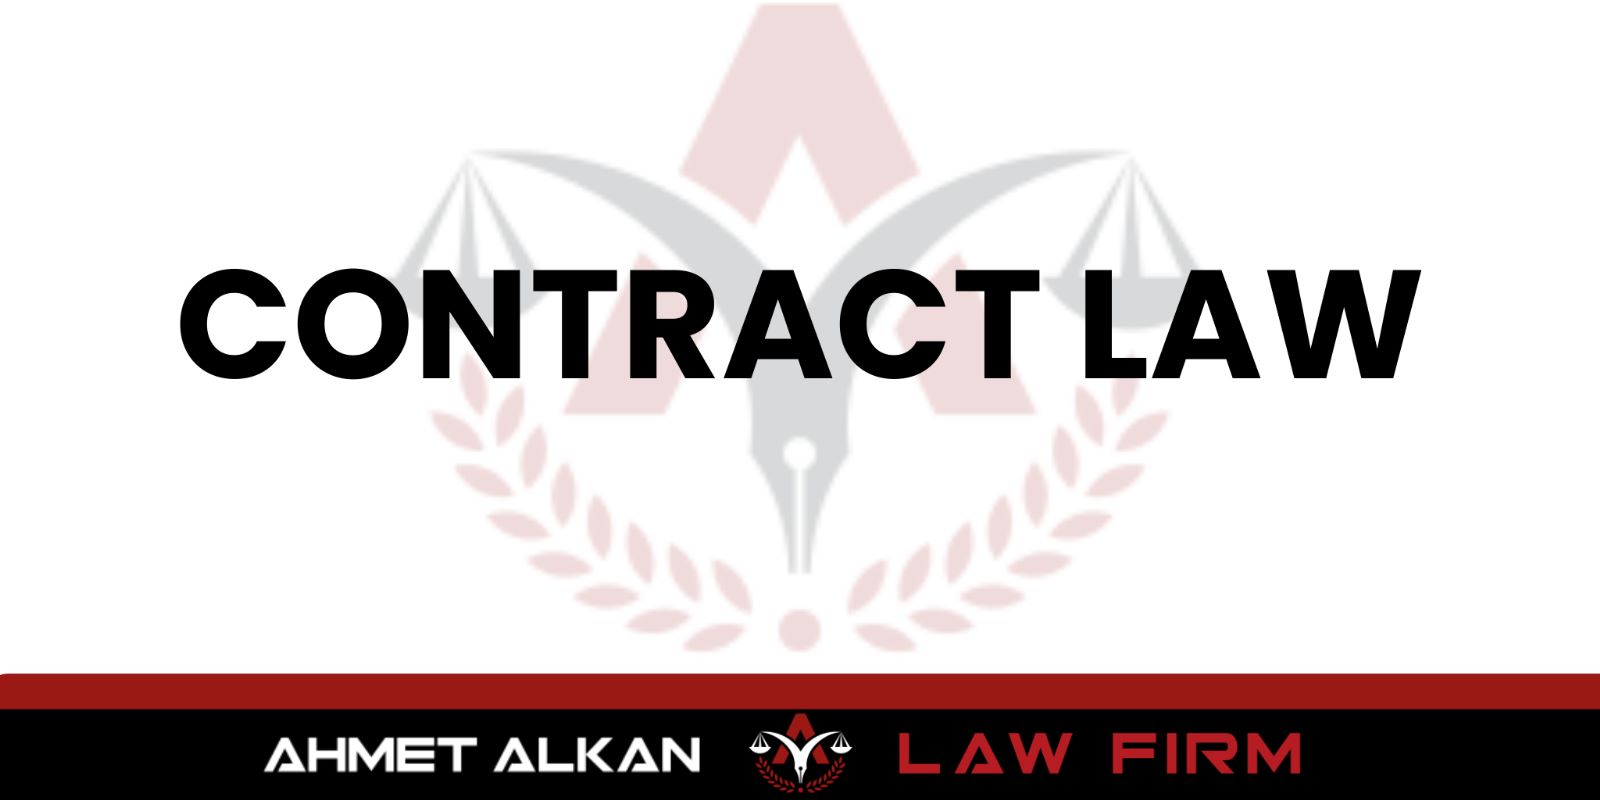 Antalya contract lawyer performs legal representation & consultancy services in legal business, transaction, dispute and litigation that fall within the regulation area of contract law.